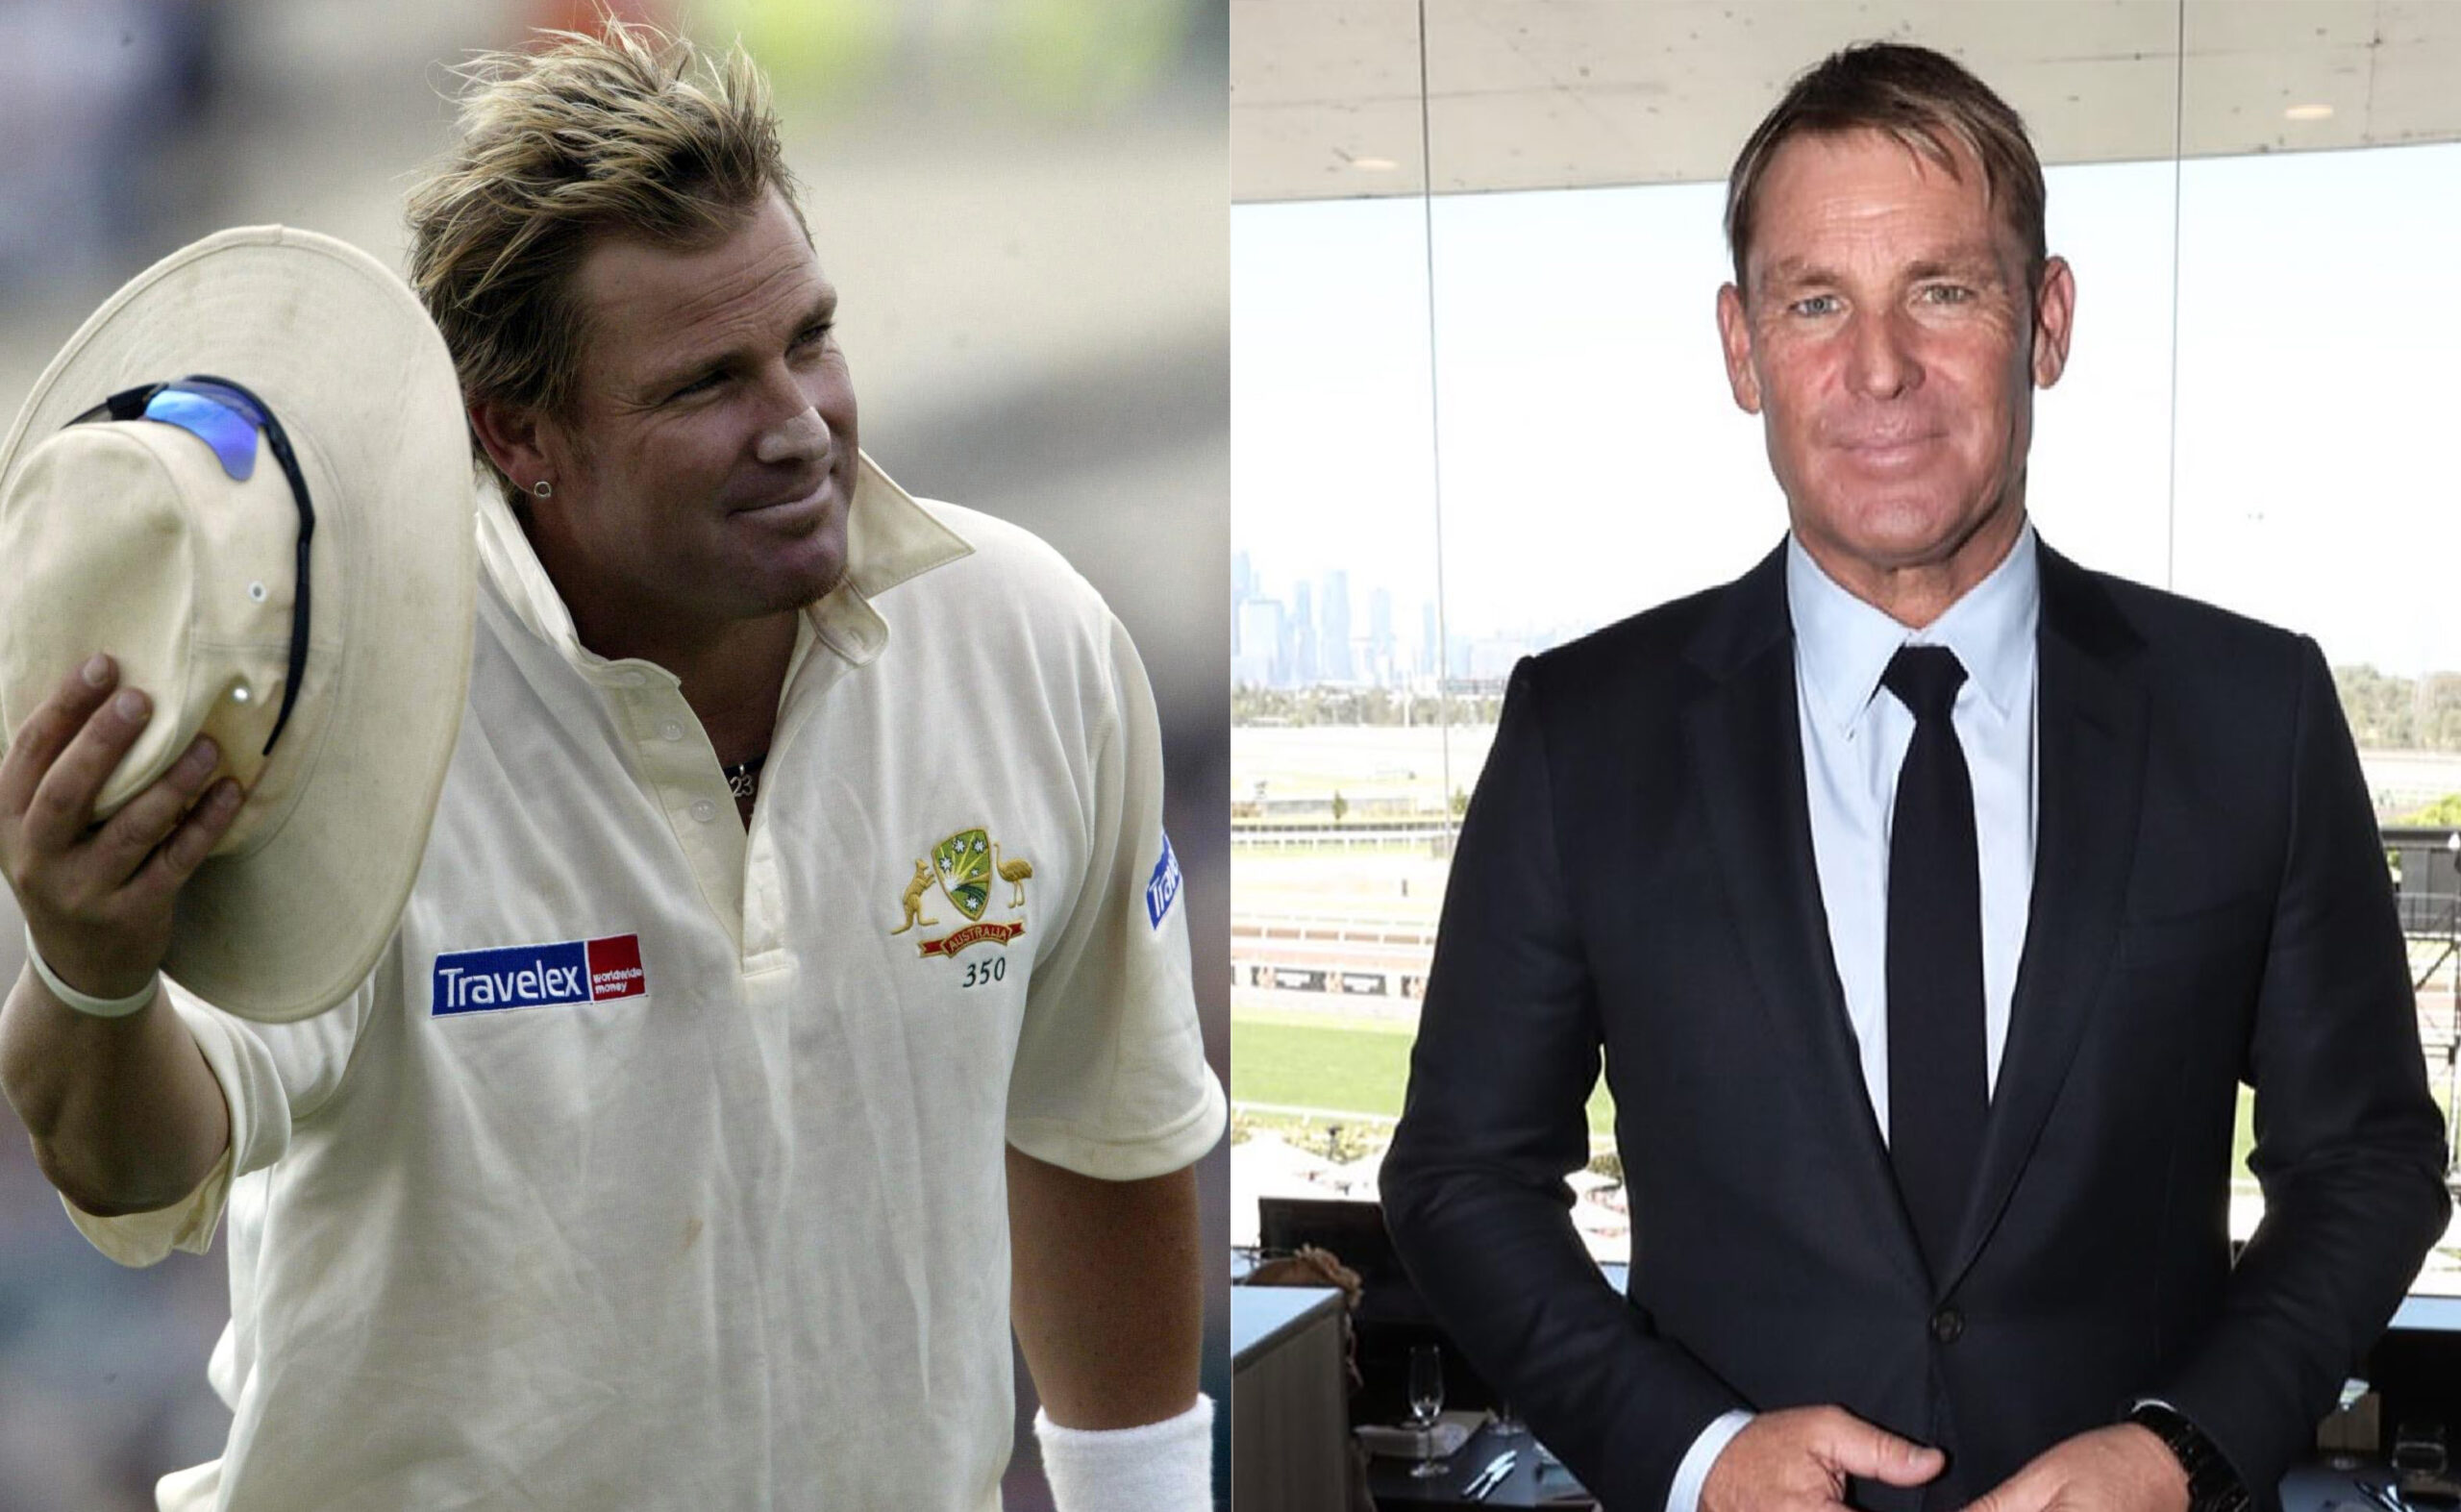 Remembering a legend: Shane Warne’s eulogy pays tribute to his sporting achievements, family bonds and his zest for life